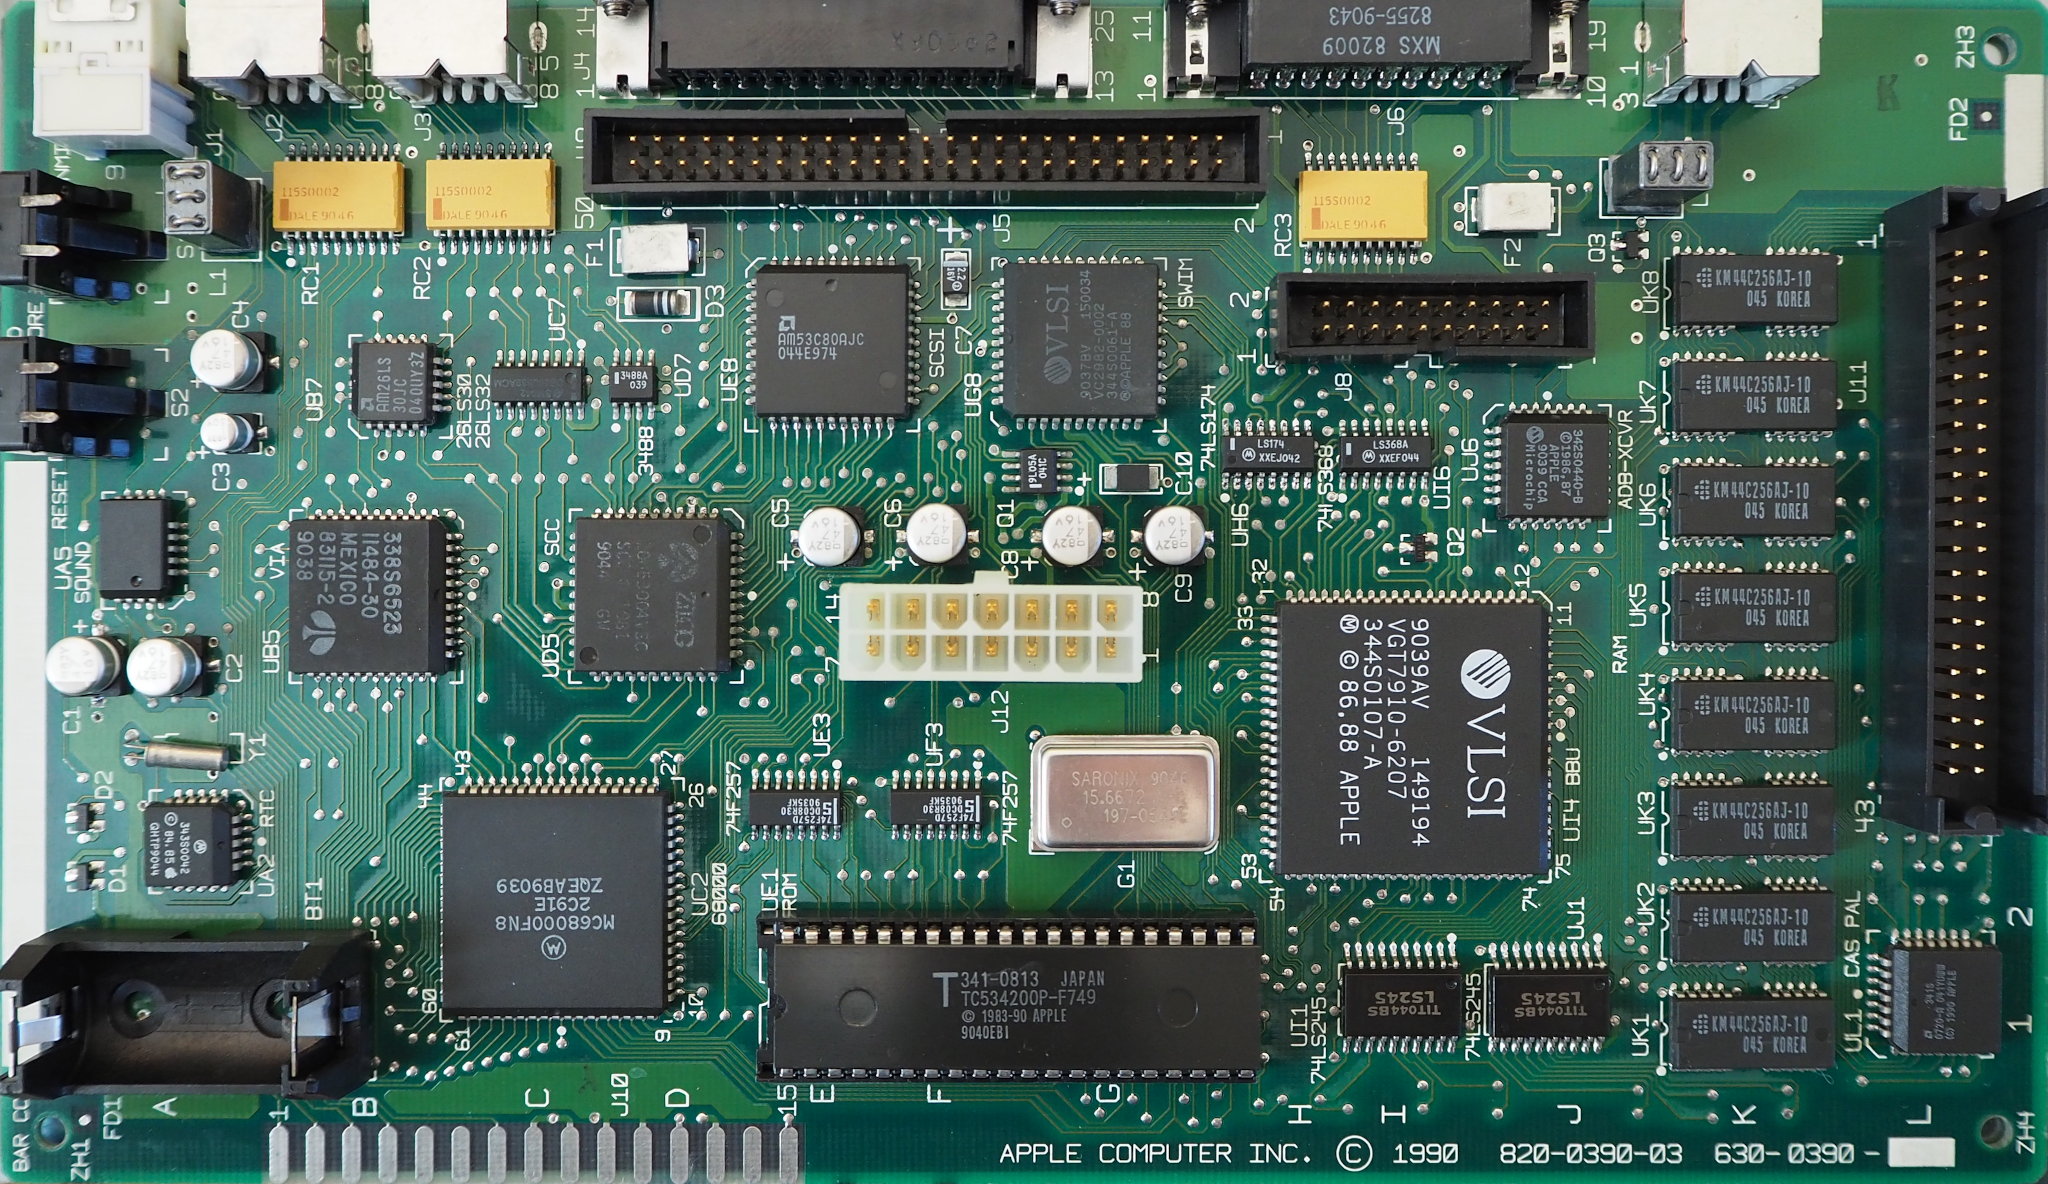 Apple Macintosh Classic logic board after cleaning and recapping